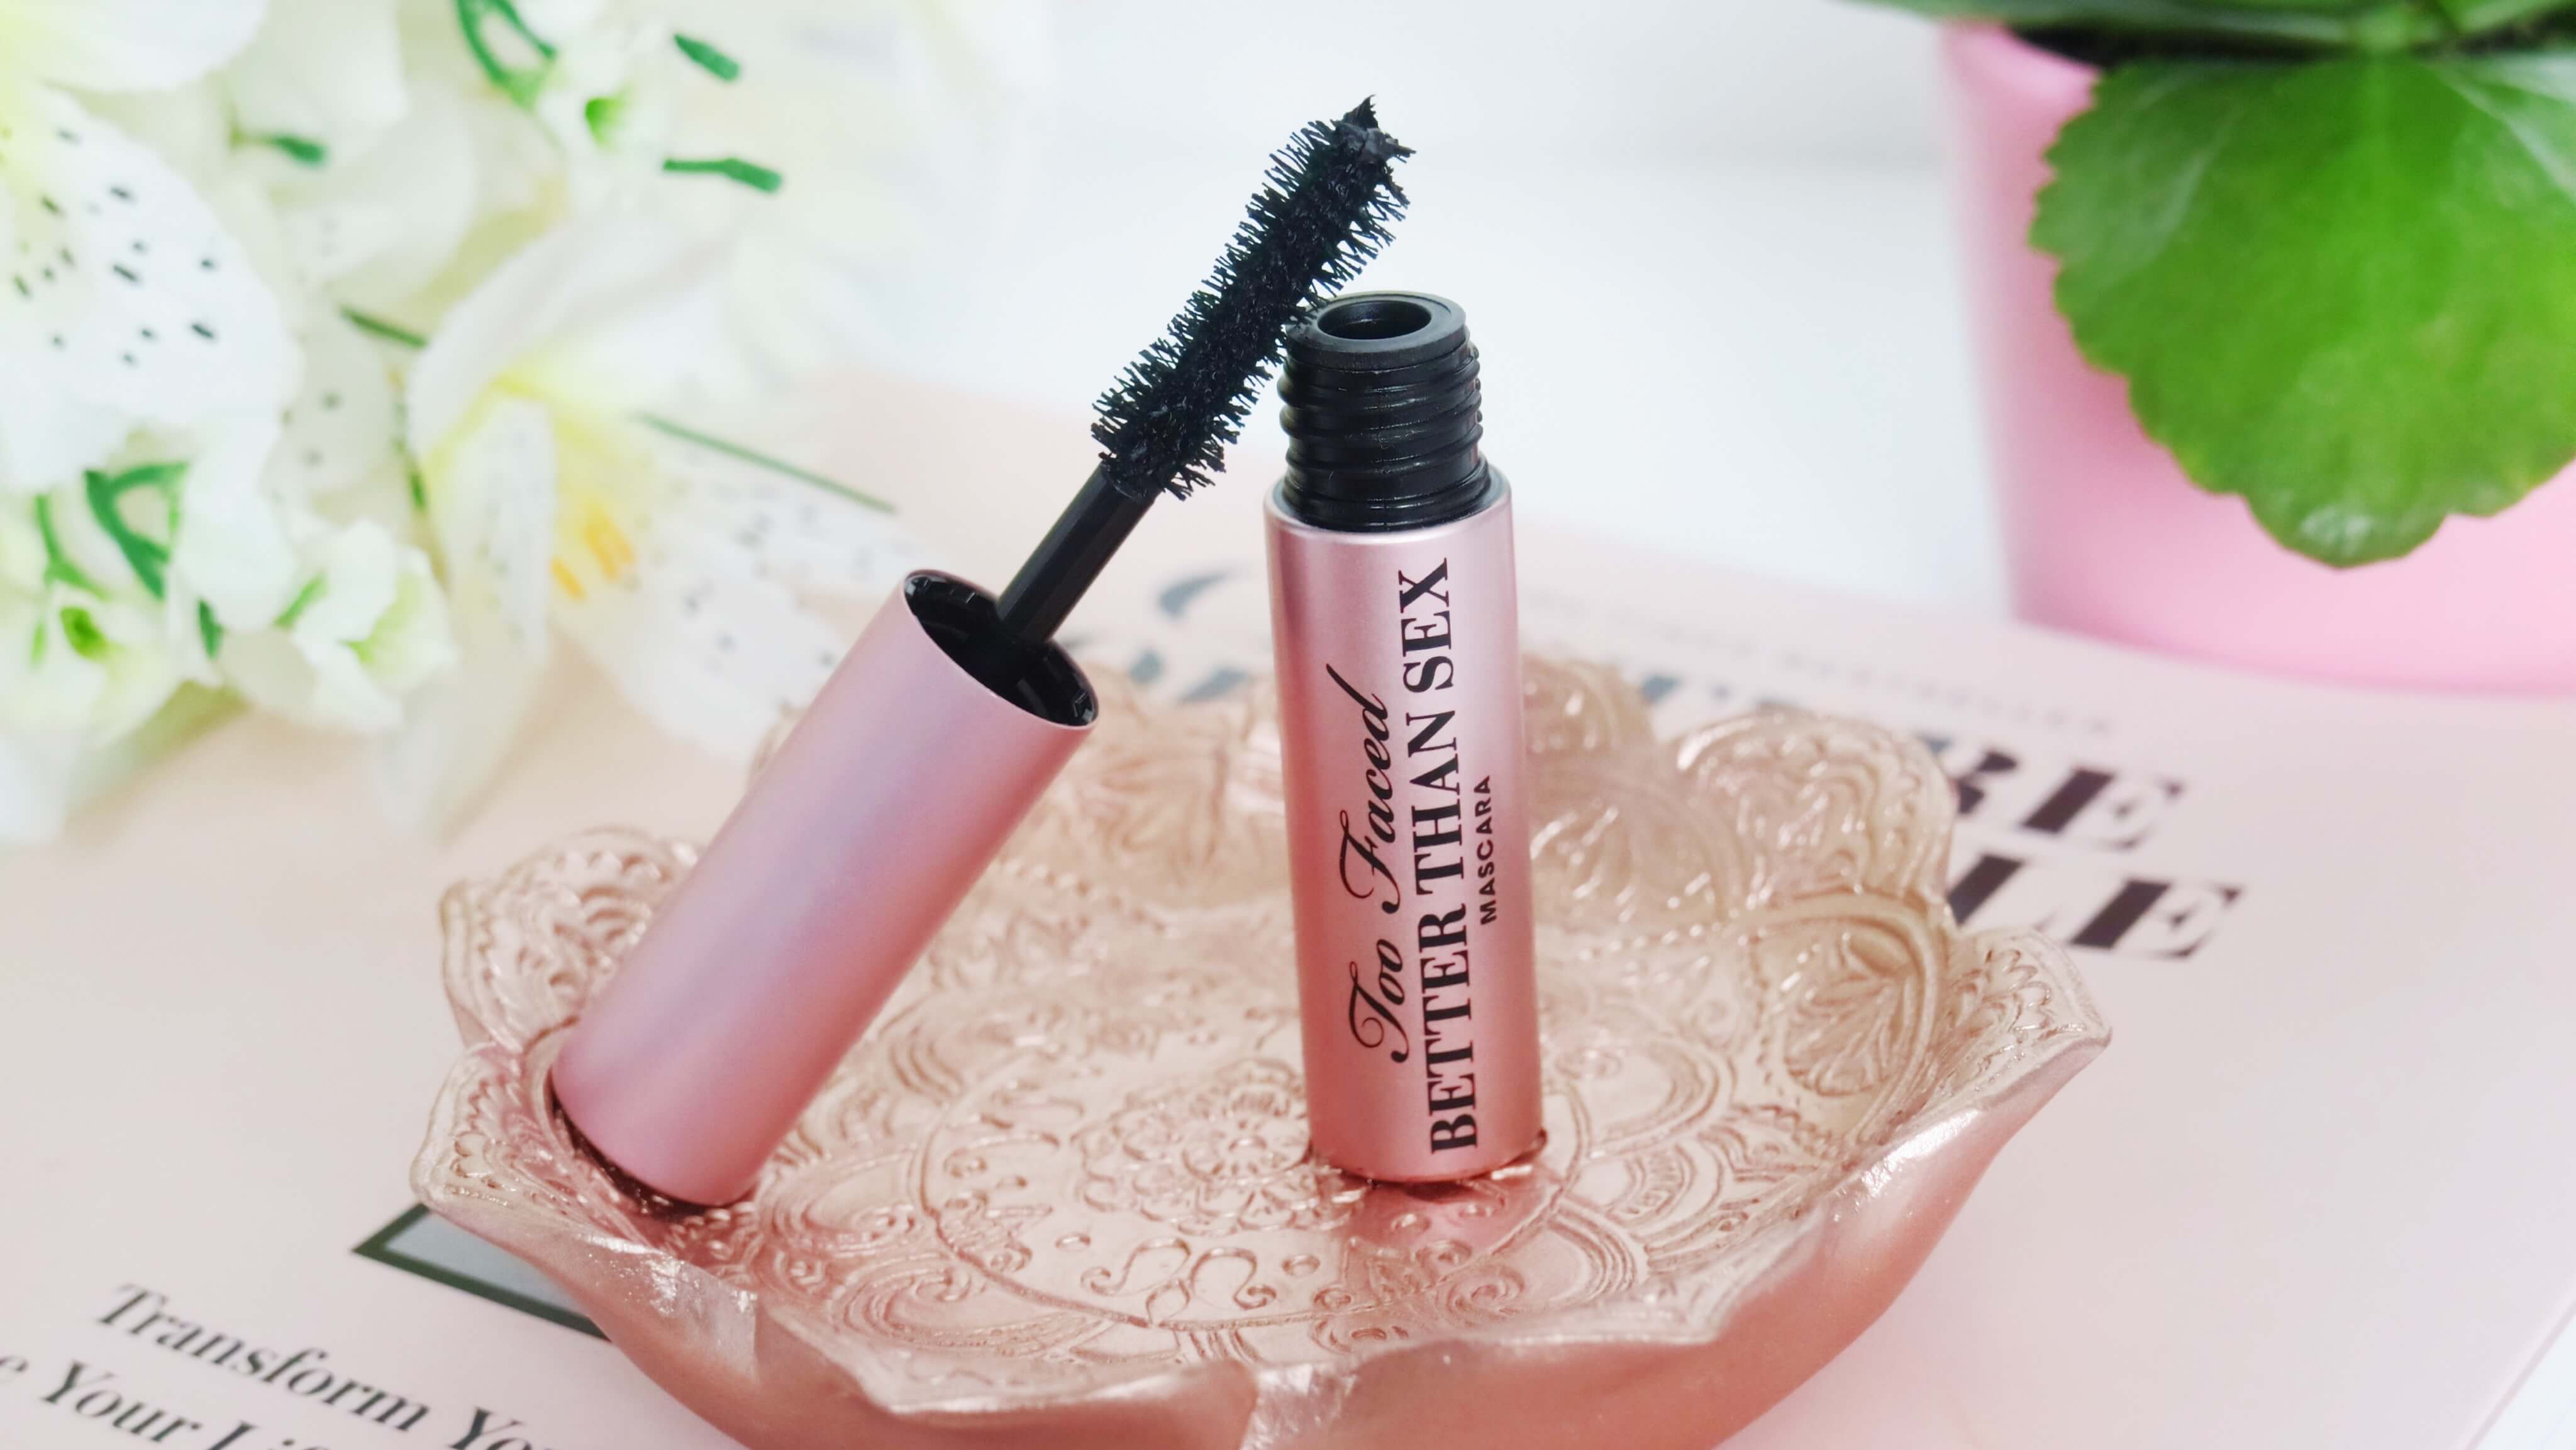 Too faced better than sex mascara review